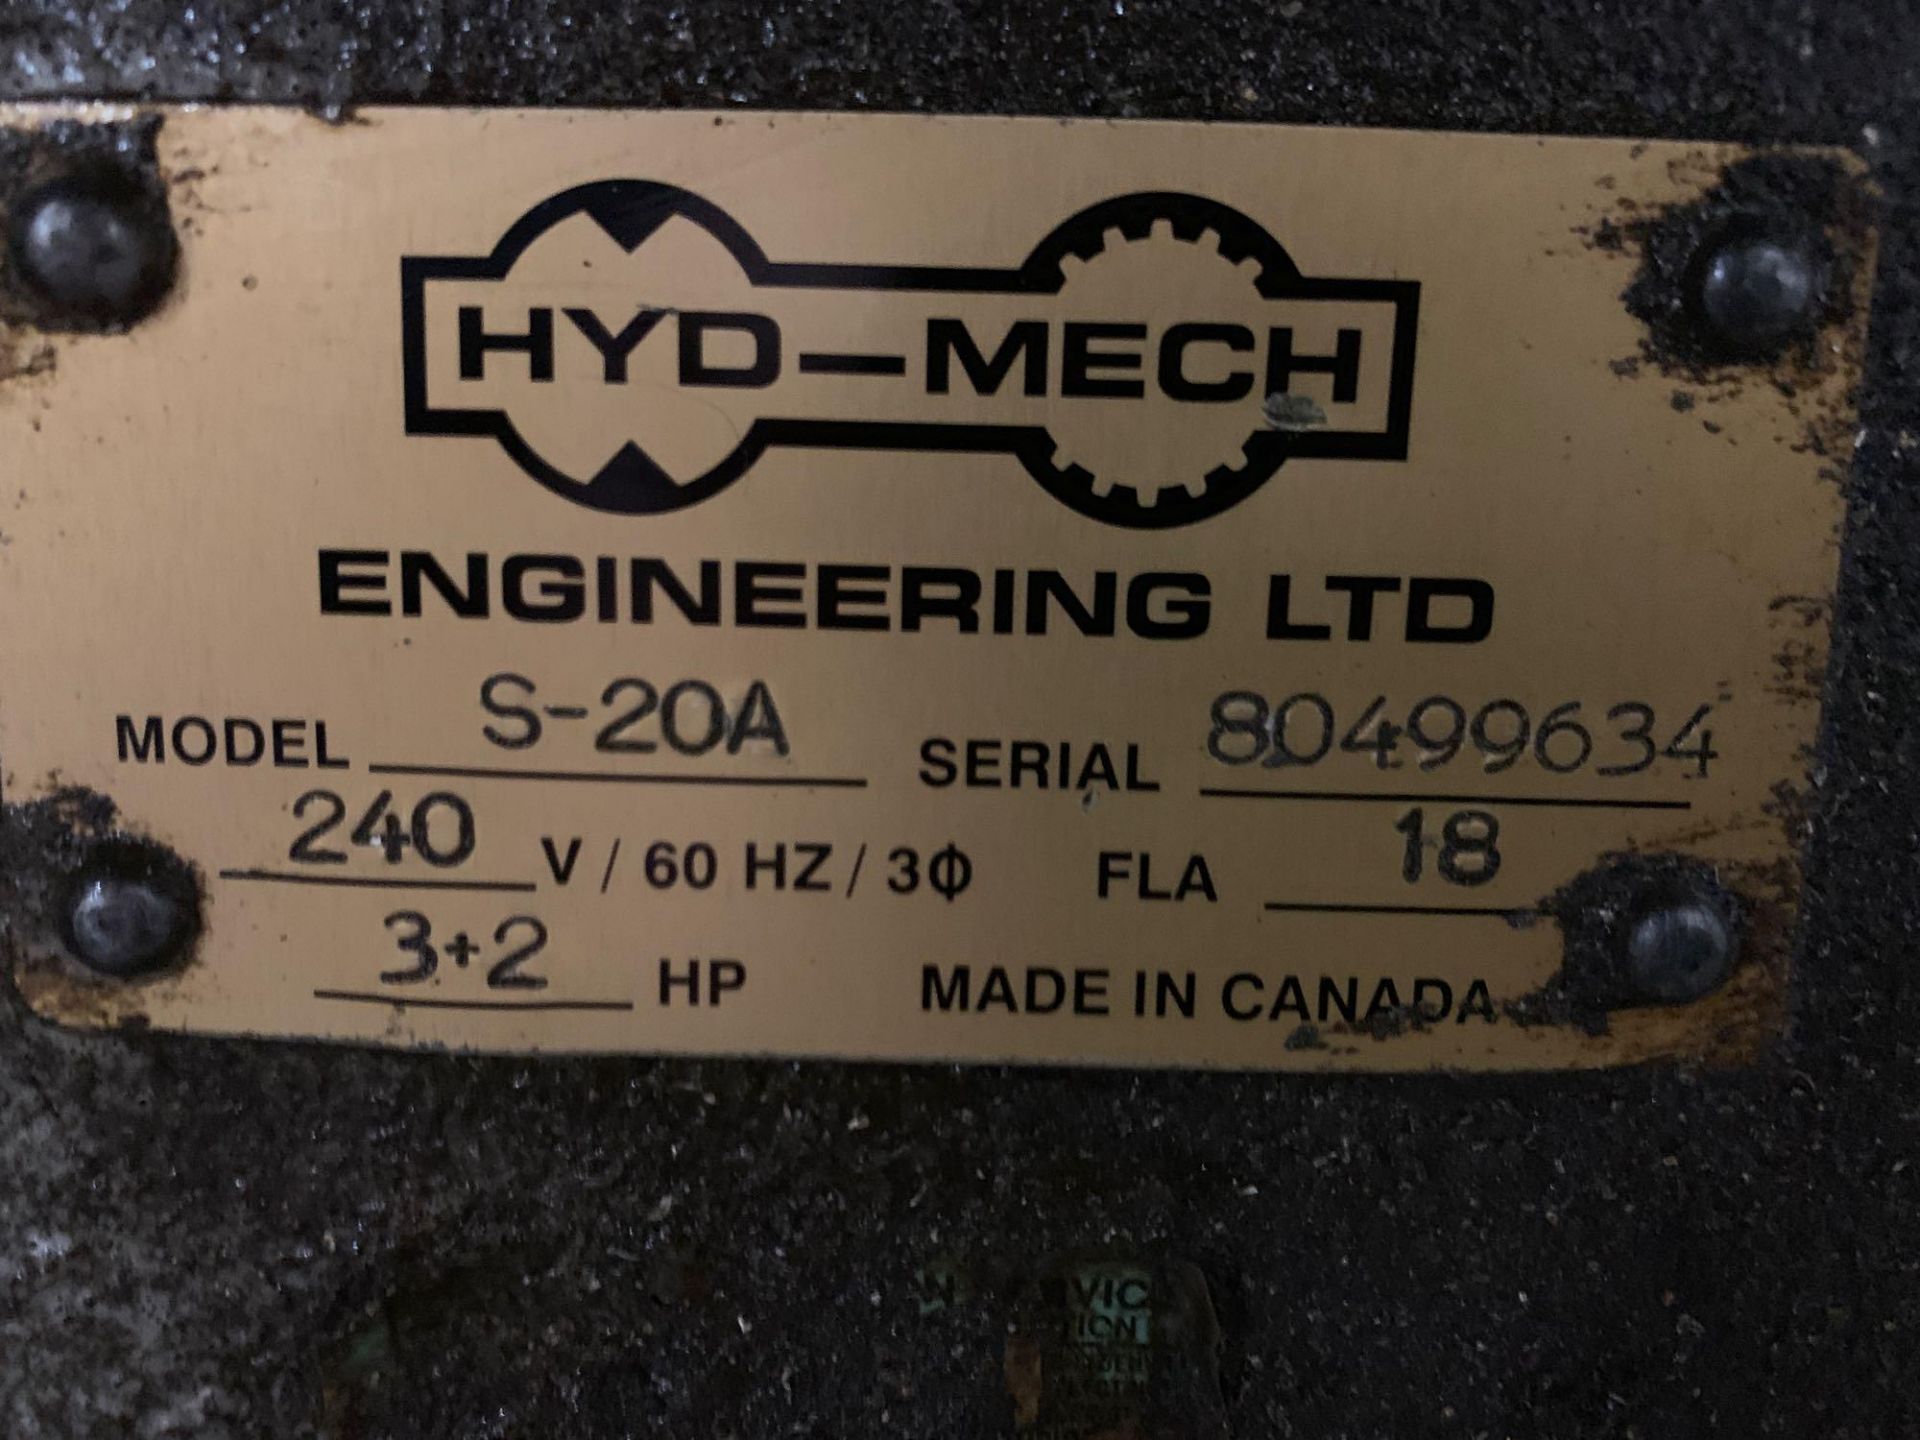 1999 Hydmech S-20A Series II Automatic Horizontal Band Saw Serial Number 80499634 - Image 23 of 25